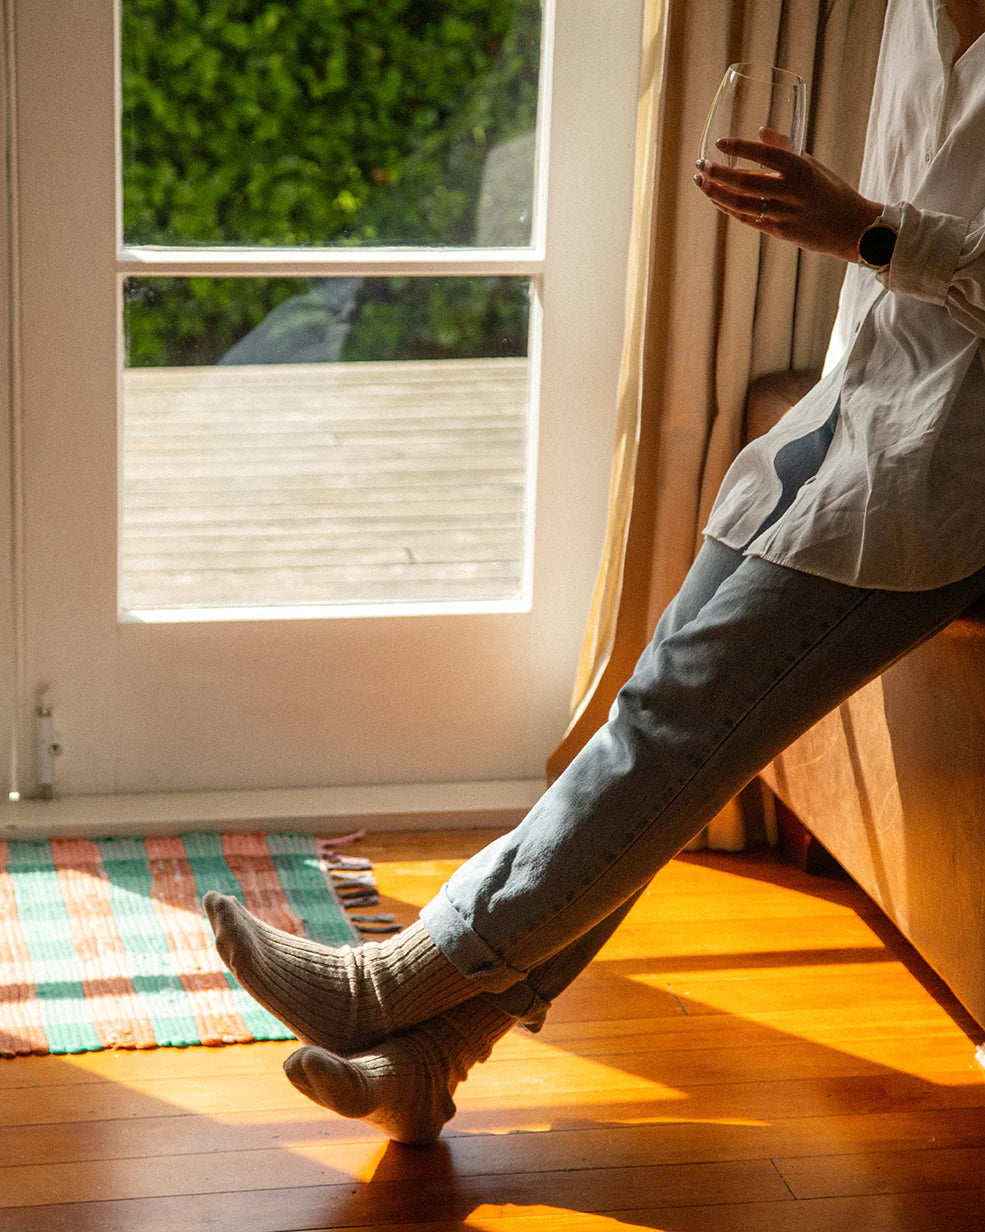 Sun-soaked relaxation: a person in casual attire, wearing sustainably produced merino wool socks from New Zealand by Pretty Fly, enjoys a peaceful moment by the window with a beverage in hand, basking in the.